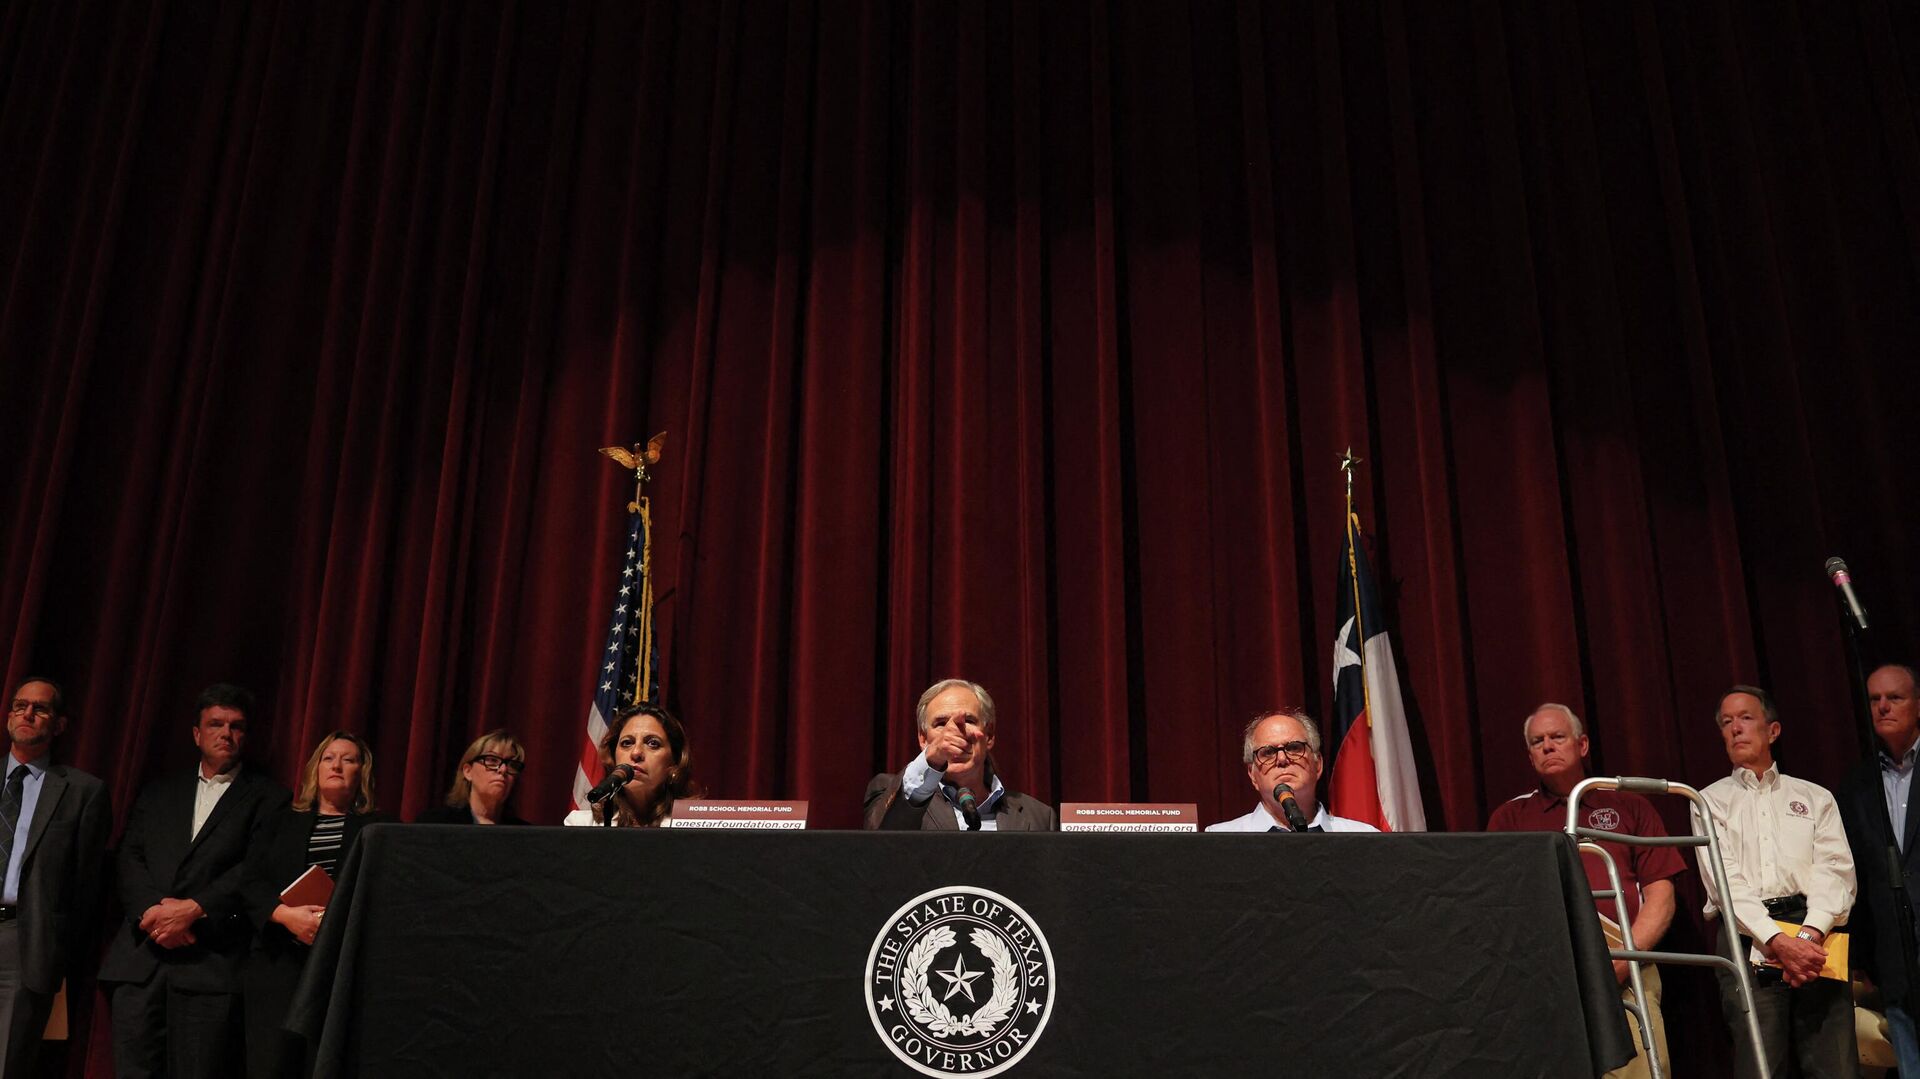 Governor Greg Abbott points to a reporter during a press conference about the mass shooting at Uvalde High School on May 27, 2022 in Uvalde, Texas. - Sputnik International, 1920, 27.05.2022